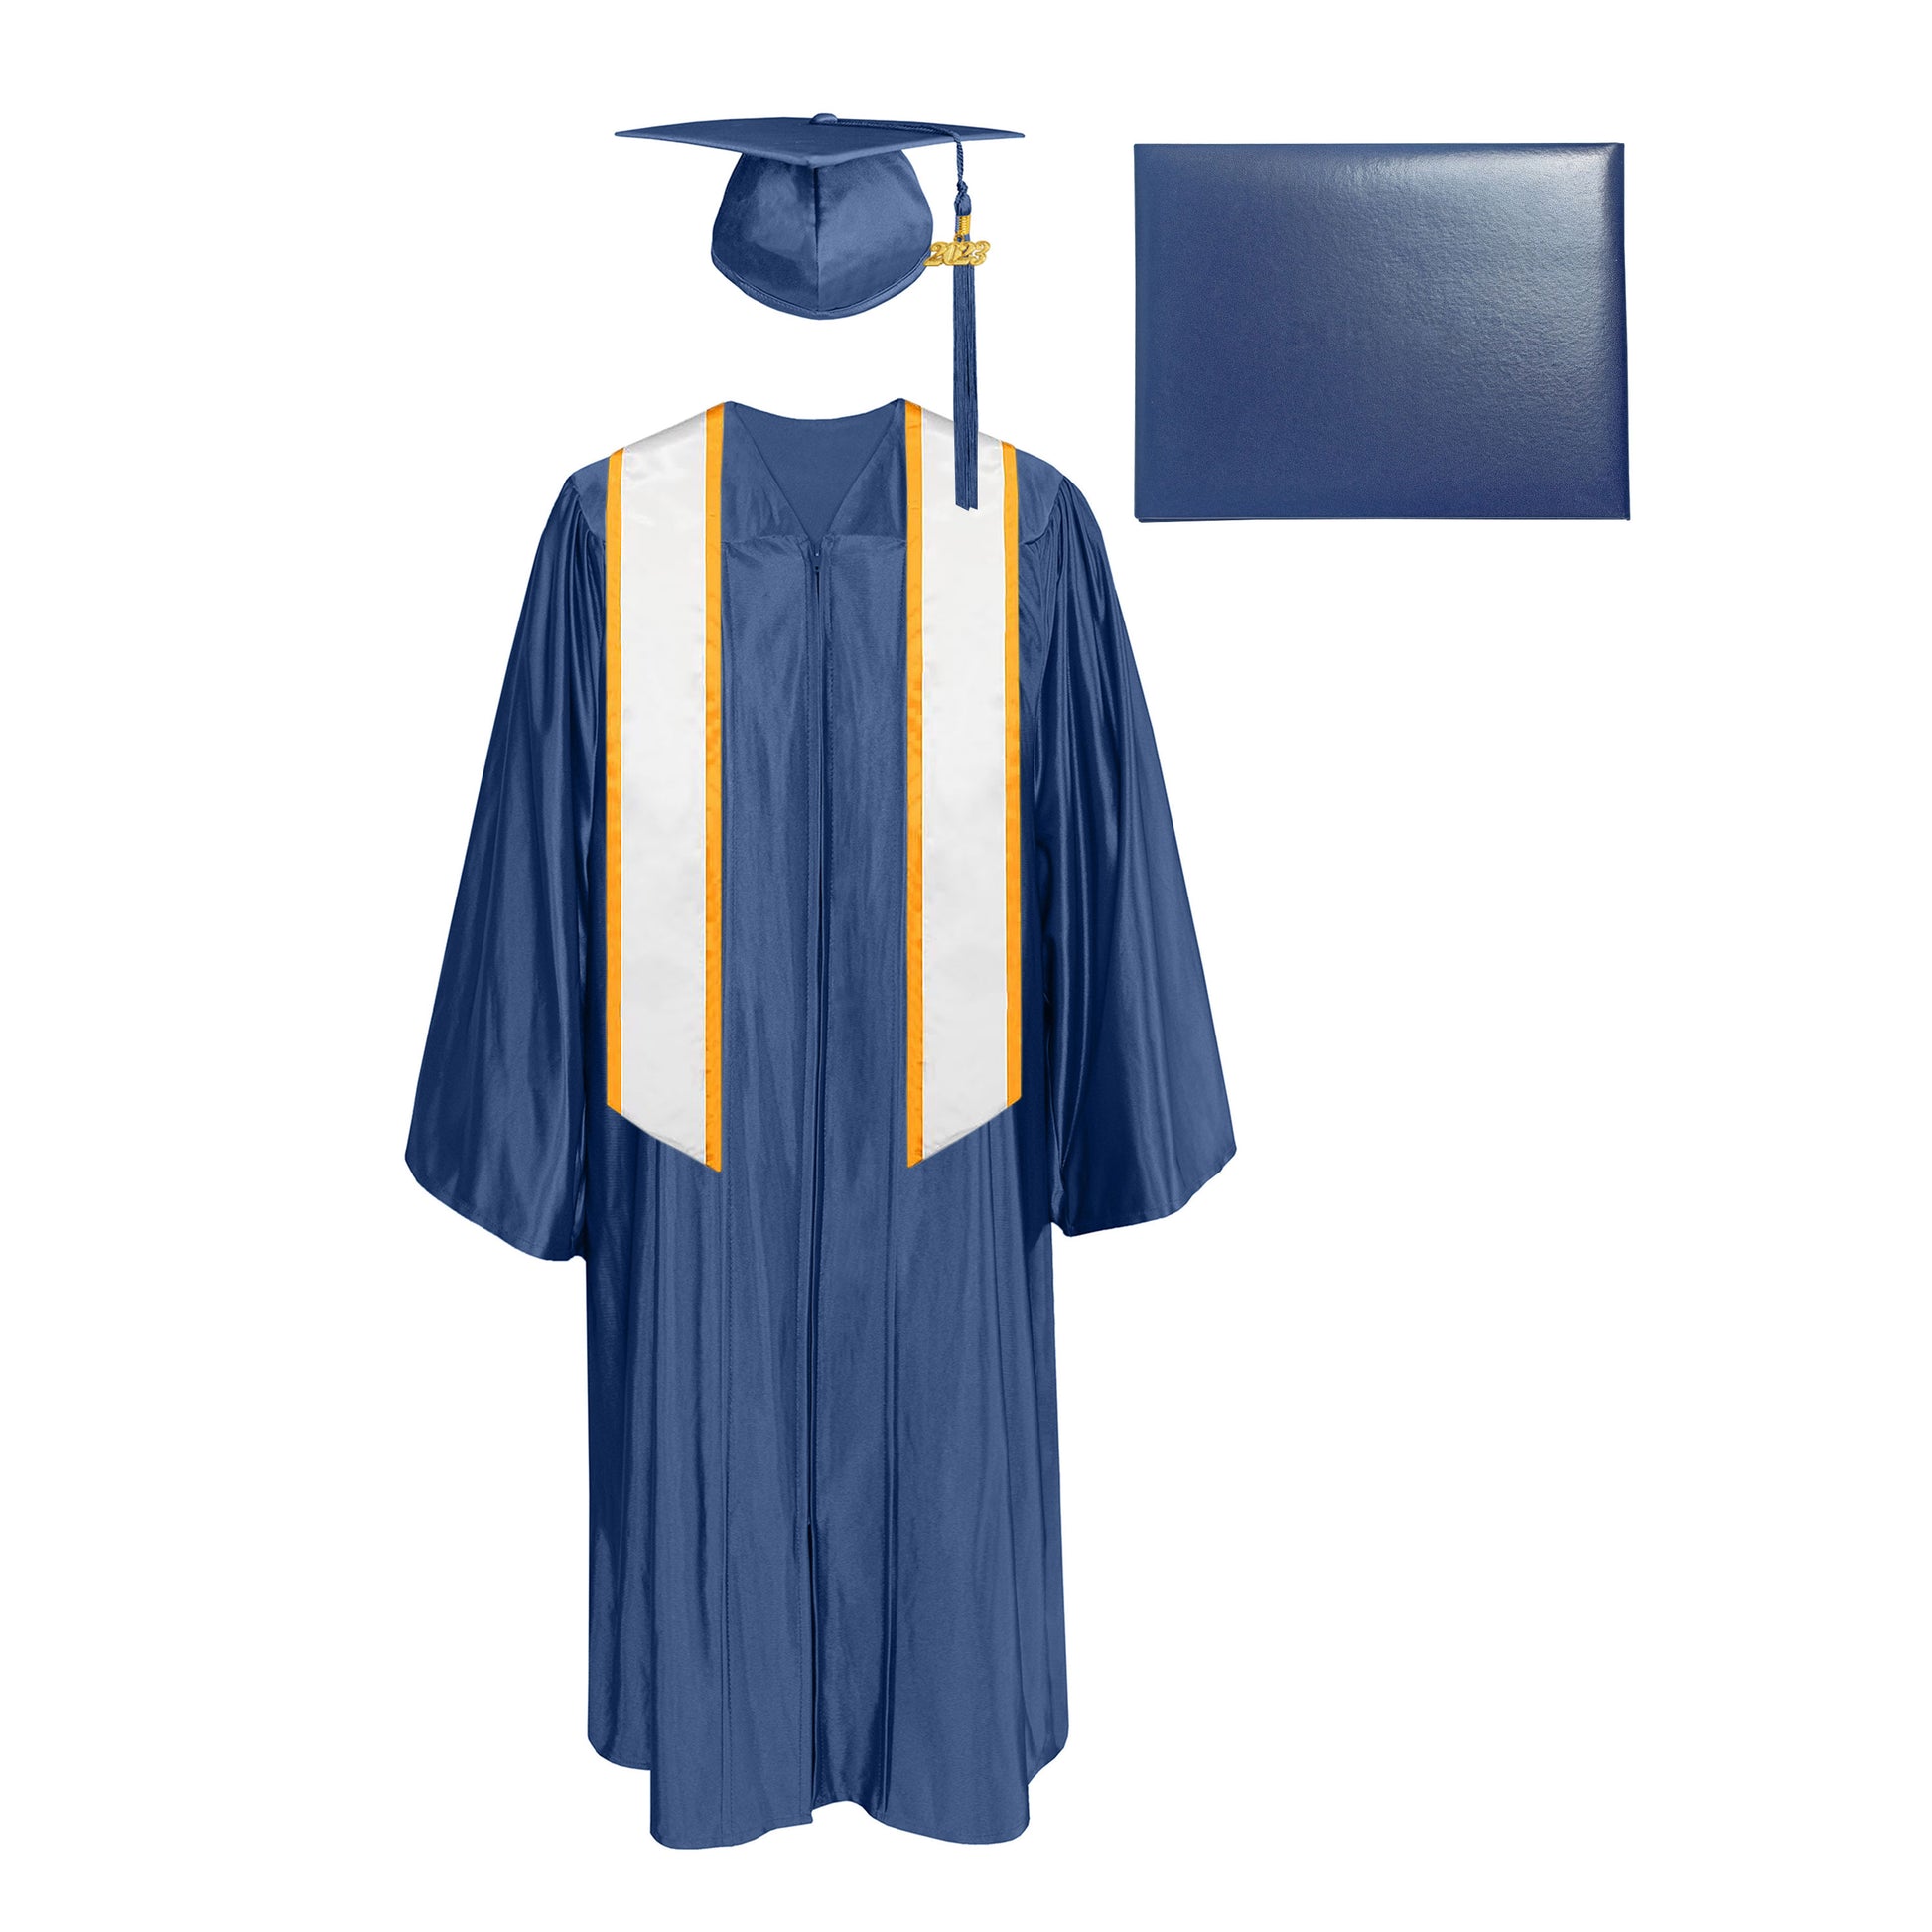 Shiny Cap, Gown, Tassel,Honor Stole Angled End with Trim 72” & Diploma Cover Package-CA graduation